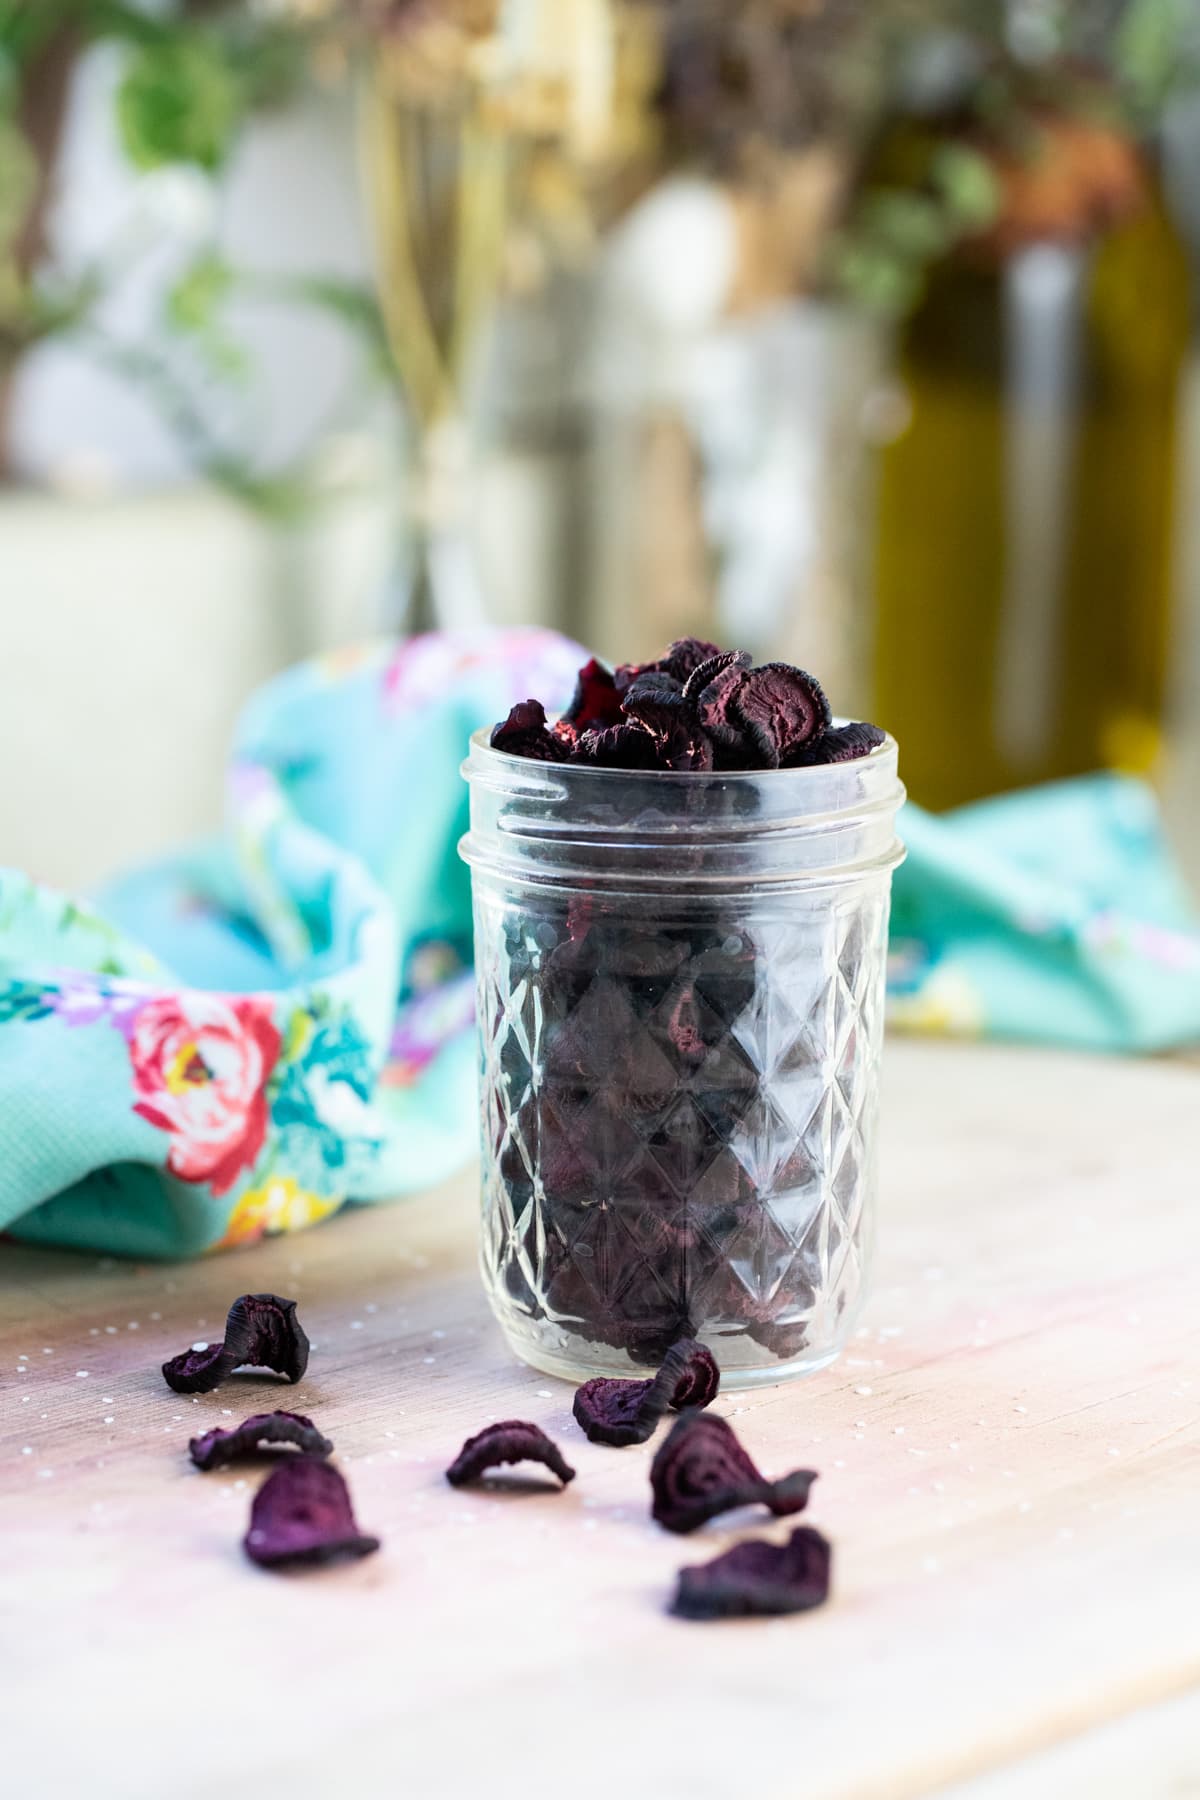 dehydrated beets in a jar